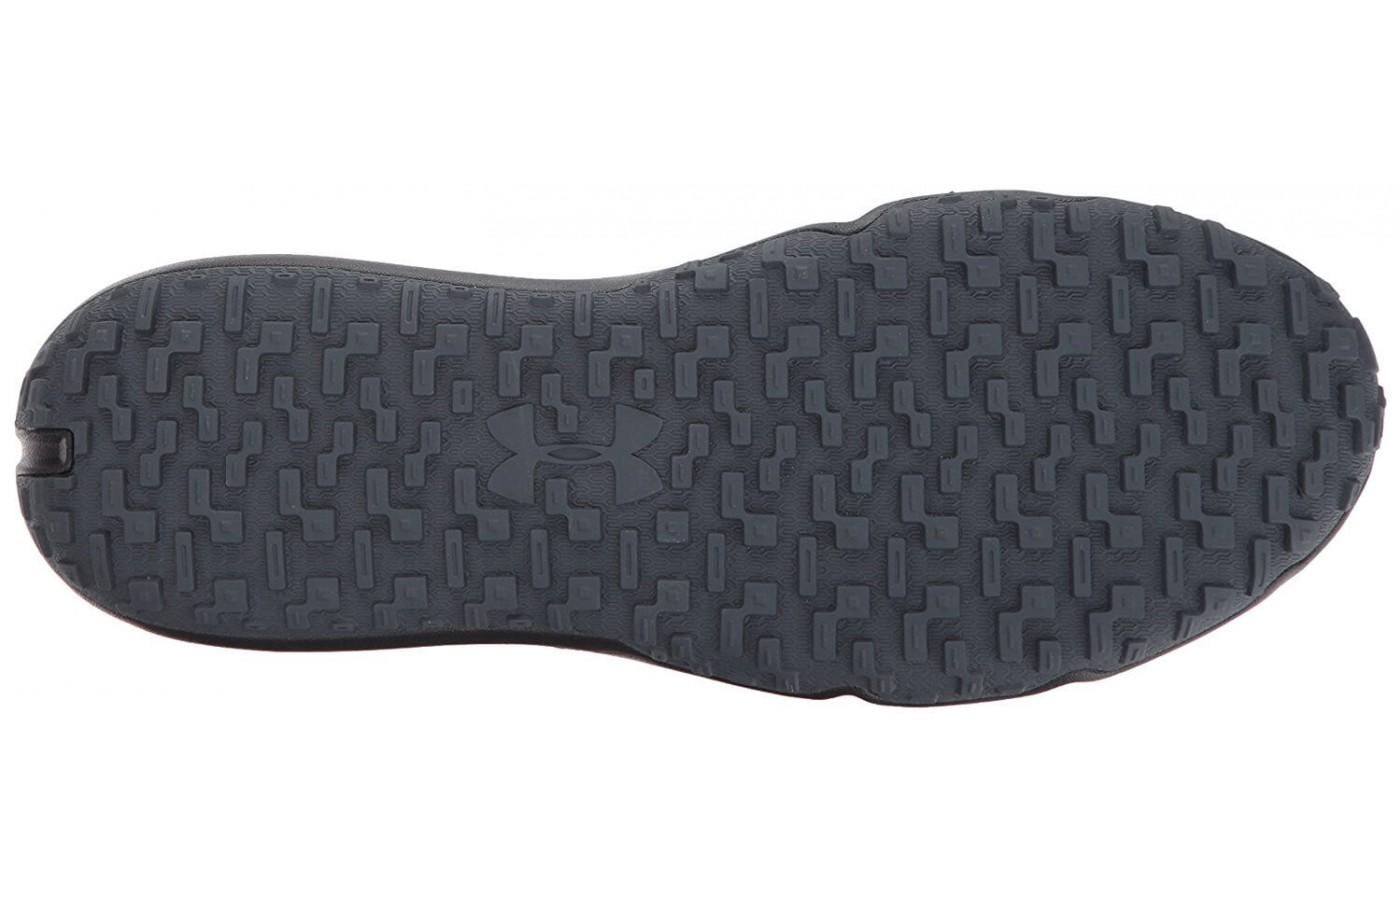 The outsole of the Under Armour Toccoa is similar in style to many trail runners.